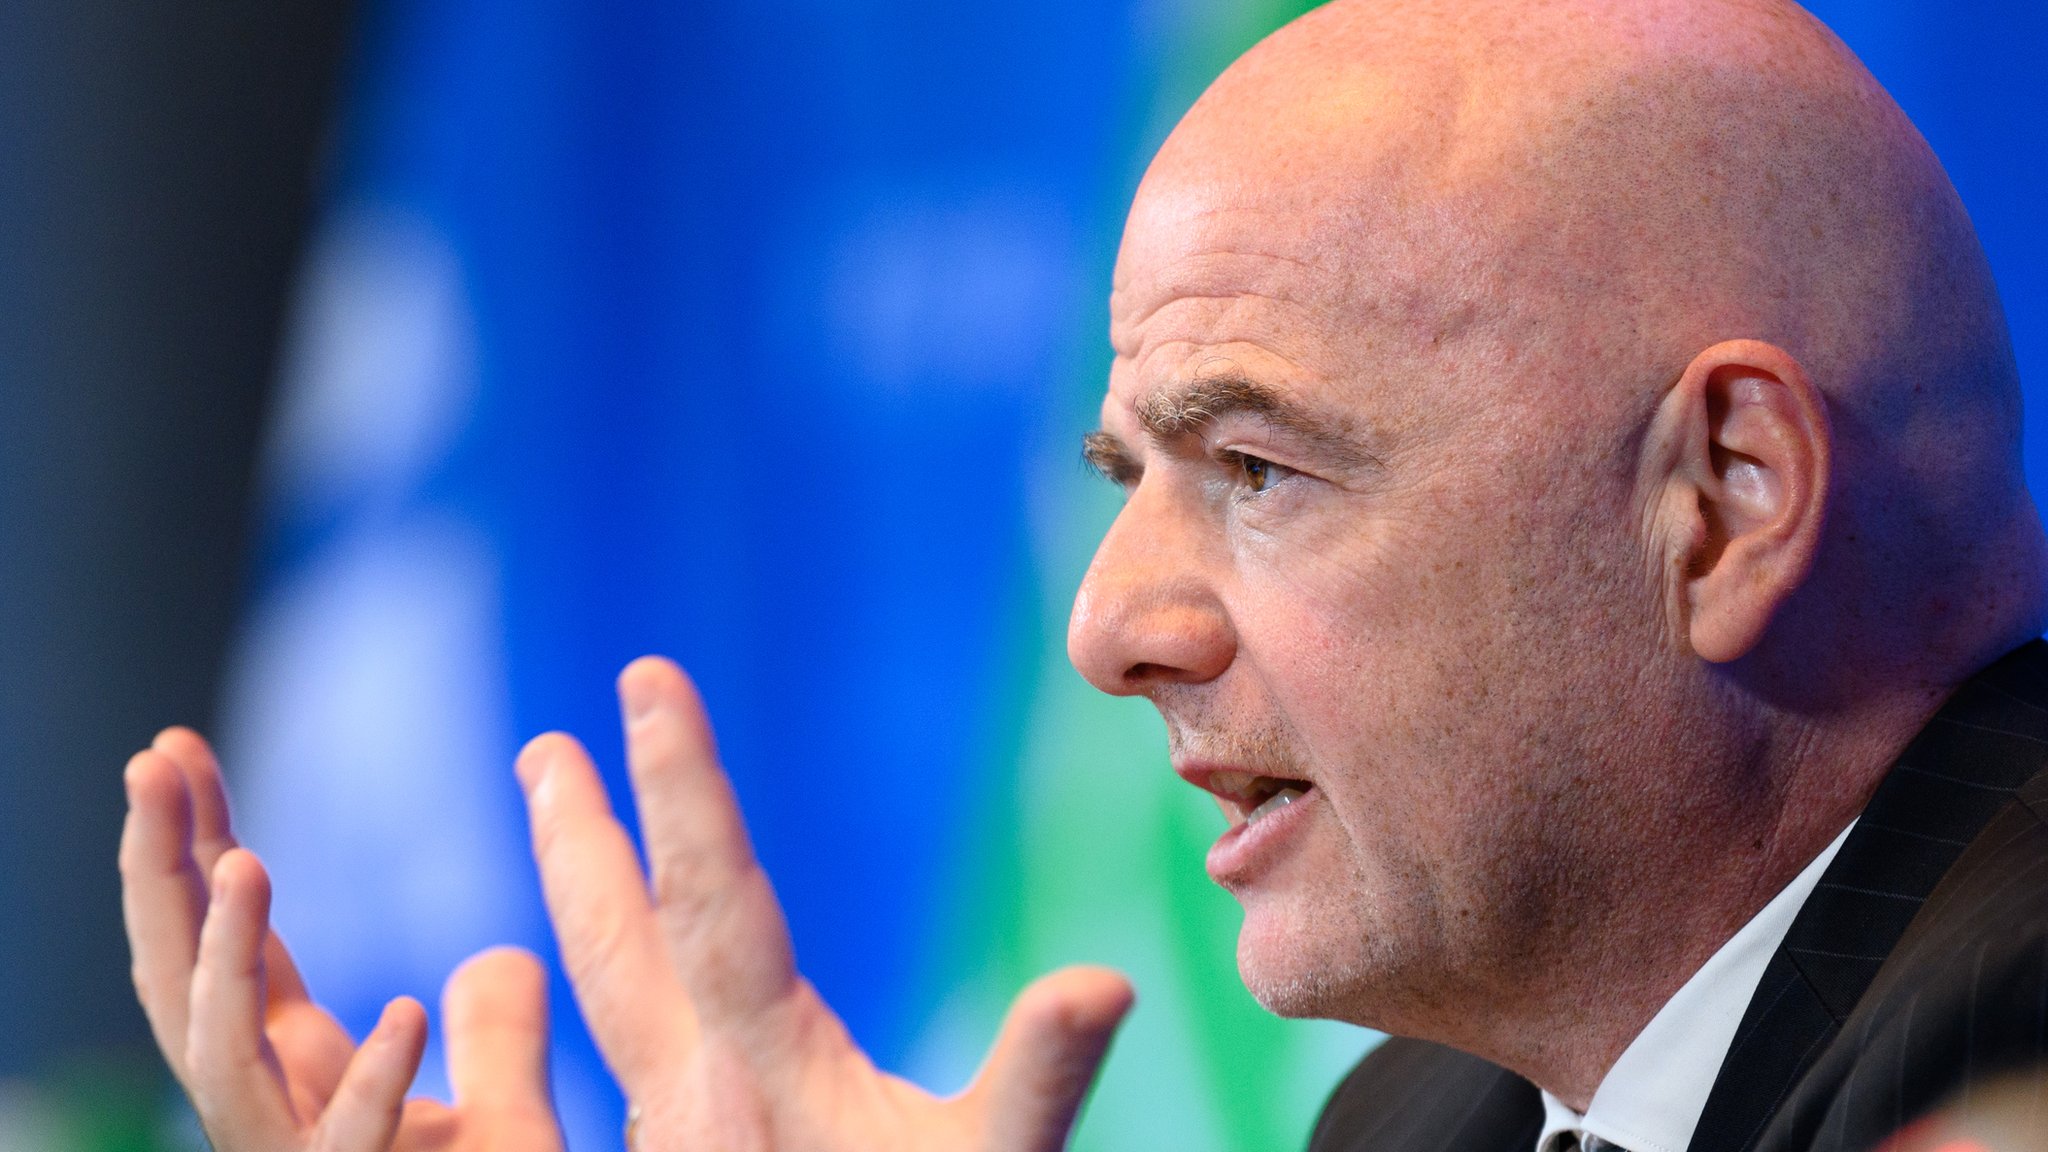 Biennial World Cup: European nations boycott not discussed - Fifa's Gianni Infantino